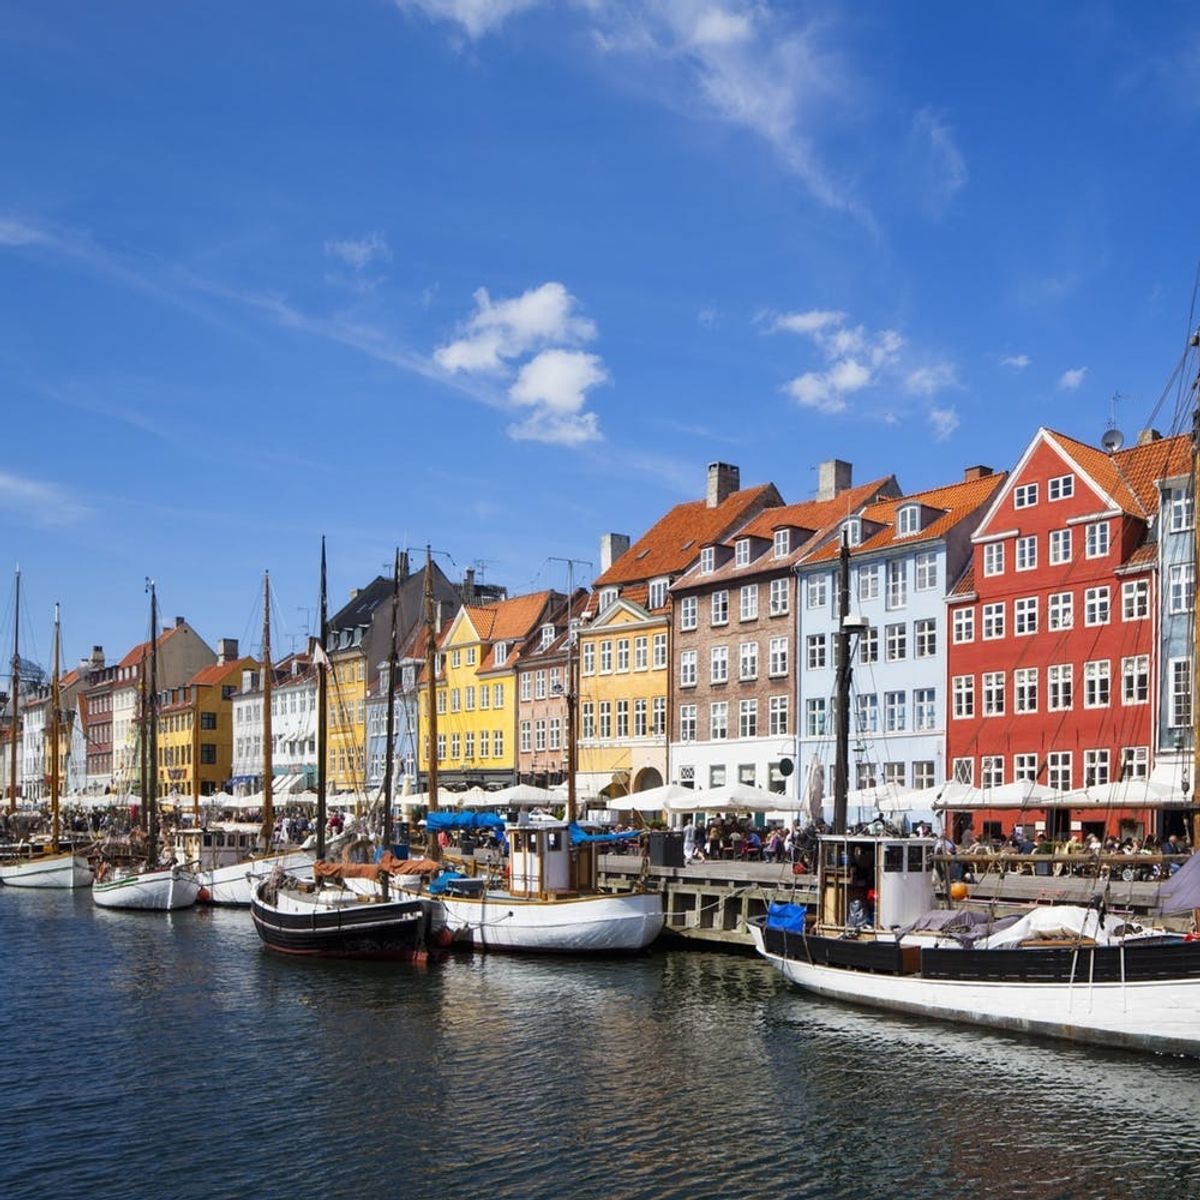 10 Awesome Things to Do in Copenhagen for $10 or Less